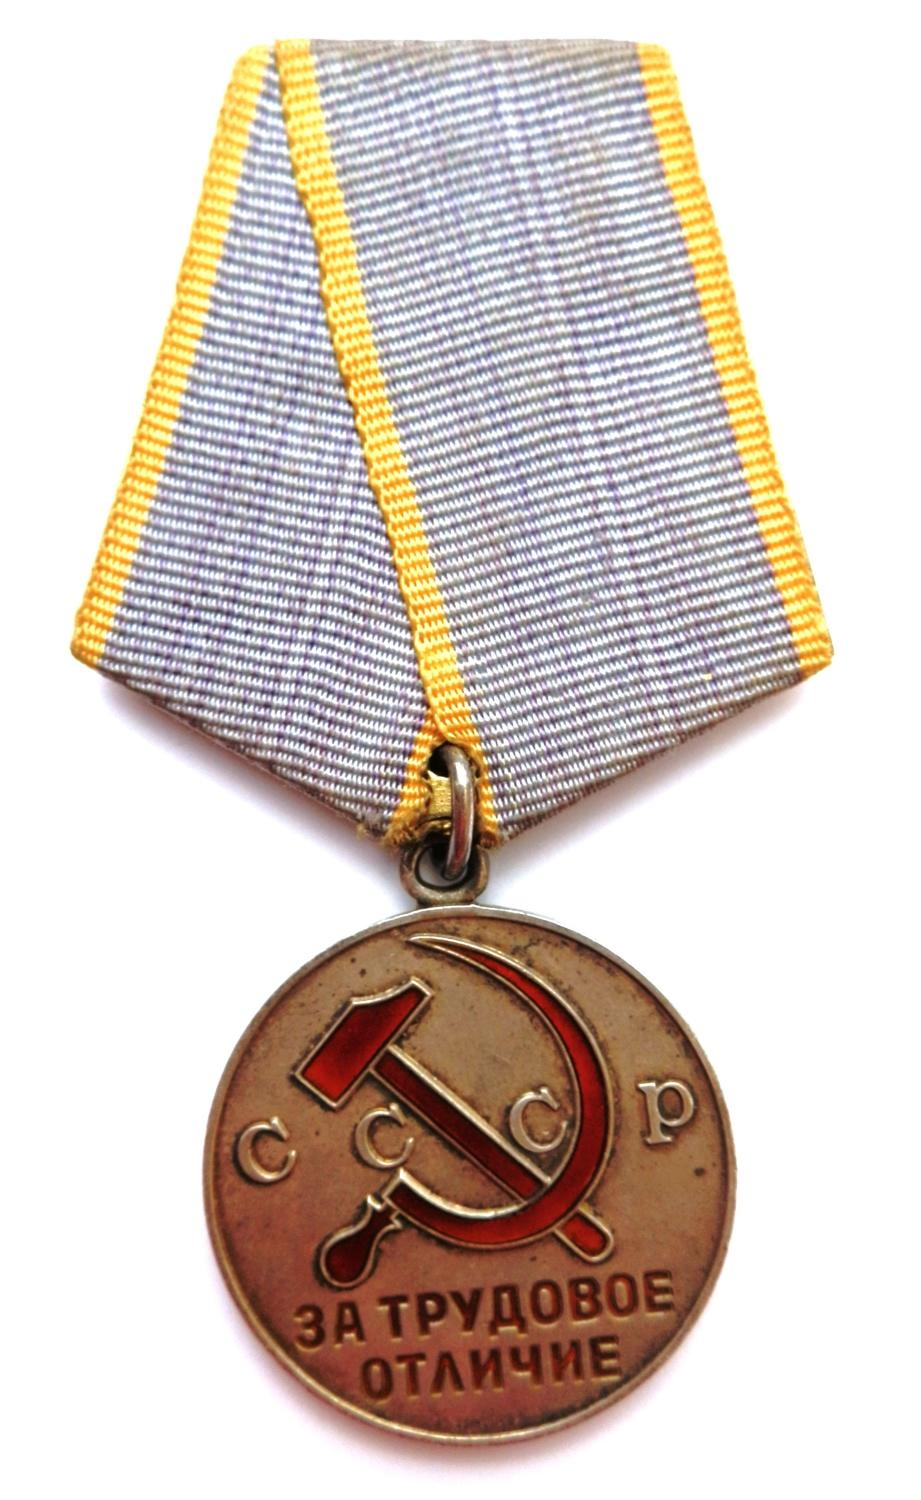 Soviet Russia Medal Distinguished Labour